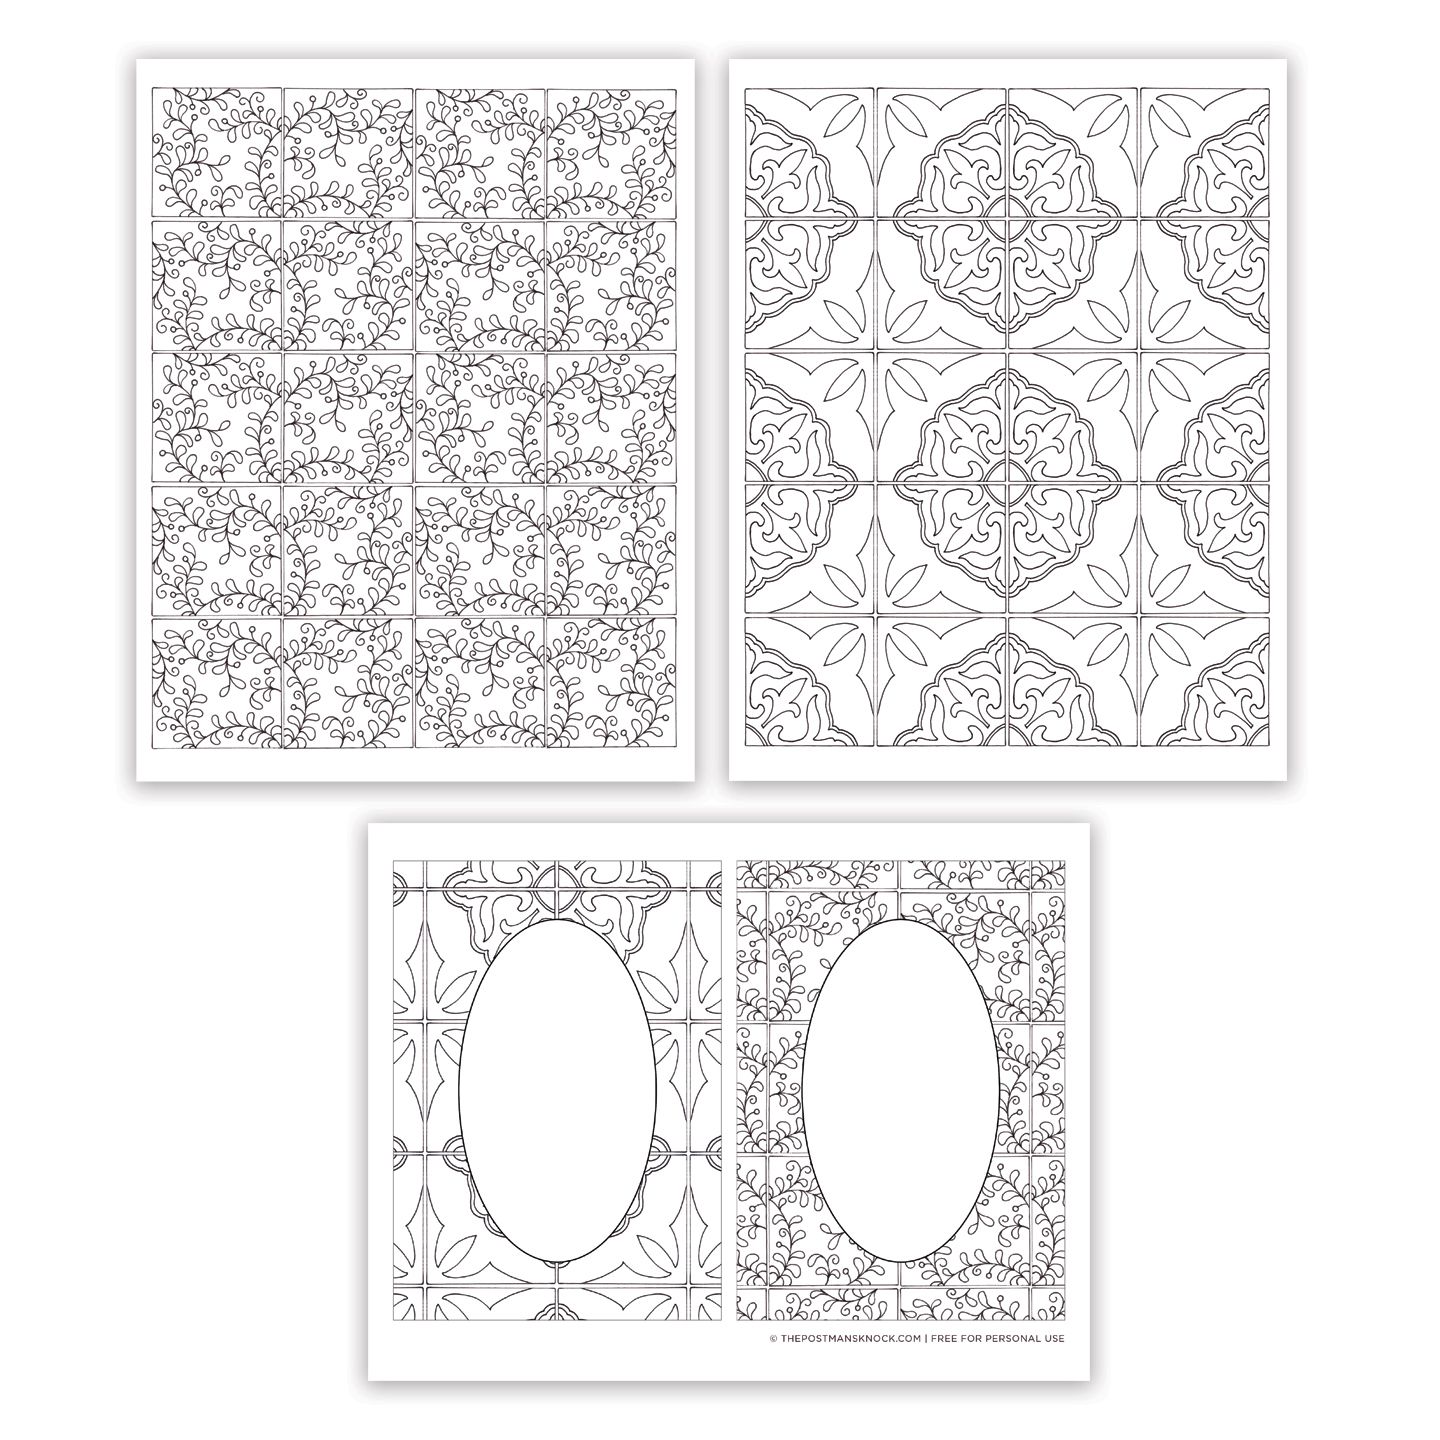 Tiles Collection Free Adult Coloring Pages | The Postman's Knock